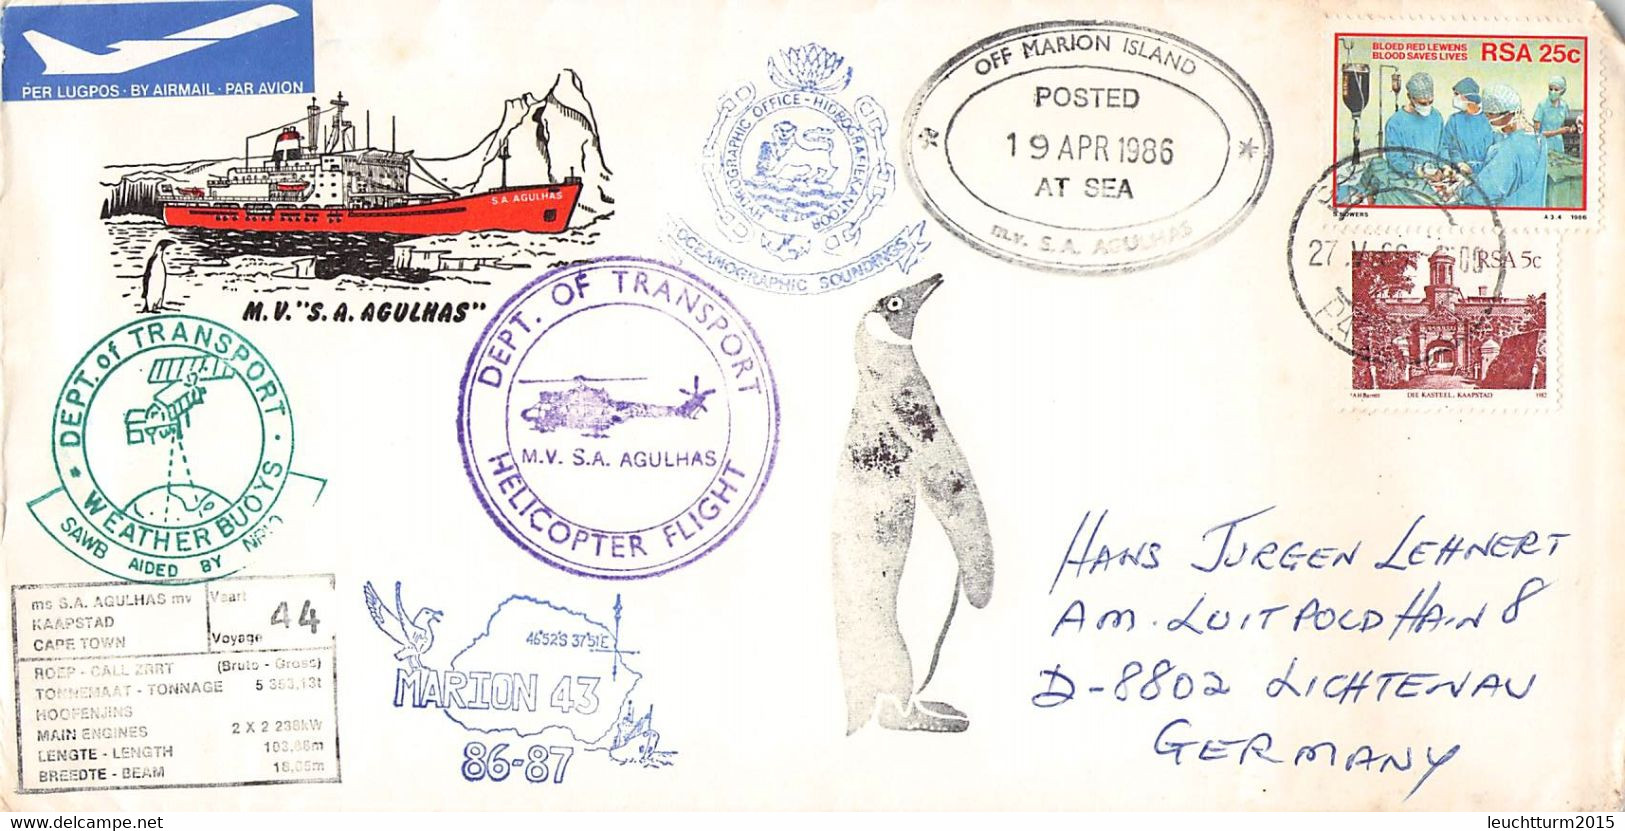 SOUTH AFRICA - POSTED AT SEA OFF MARION ISLAND 1986 / GR240 - Briefe U. Dokumente